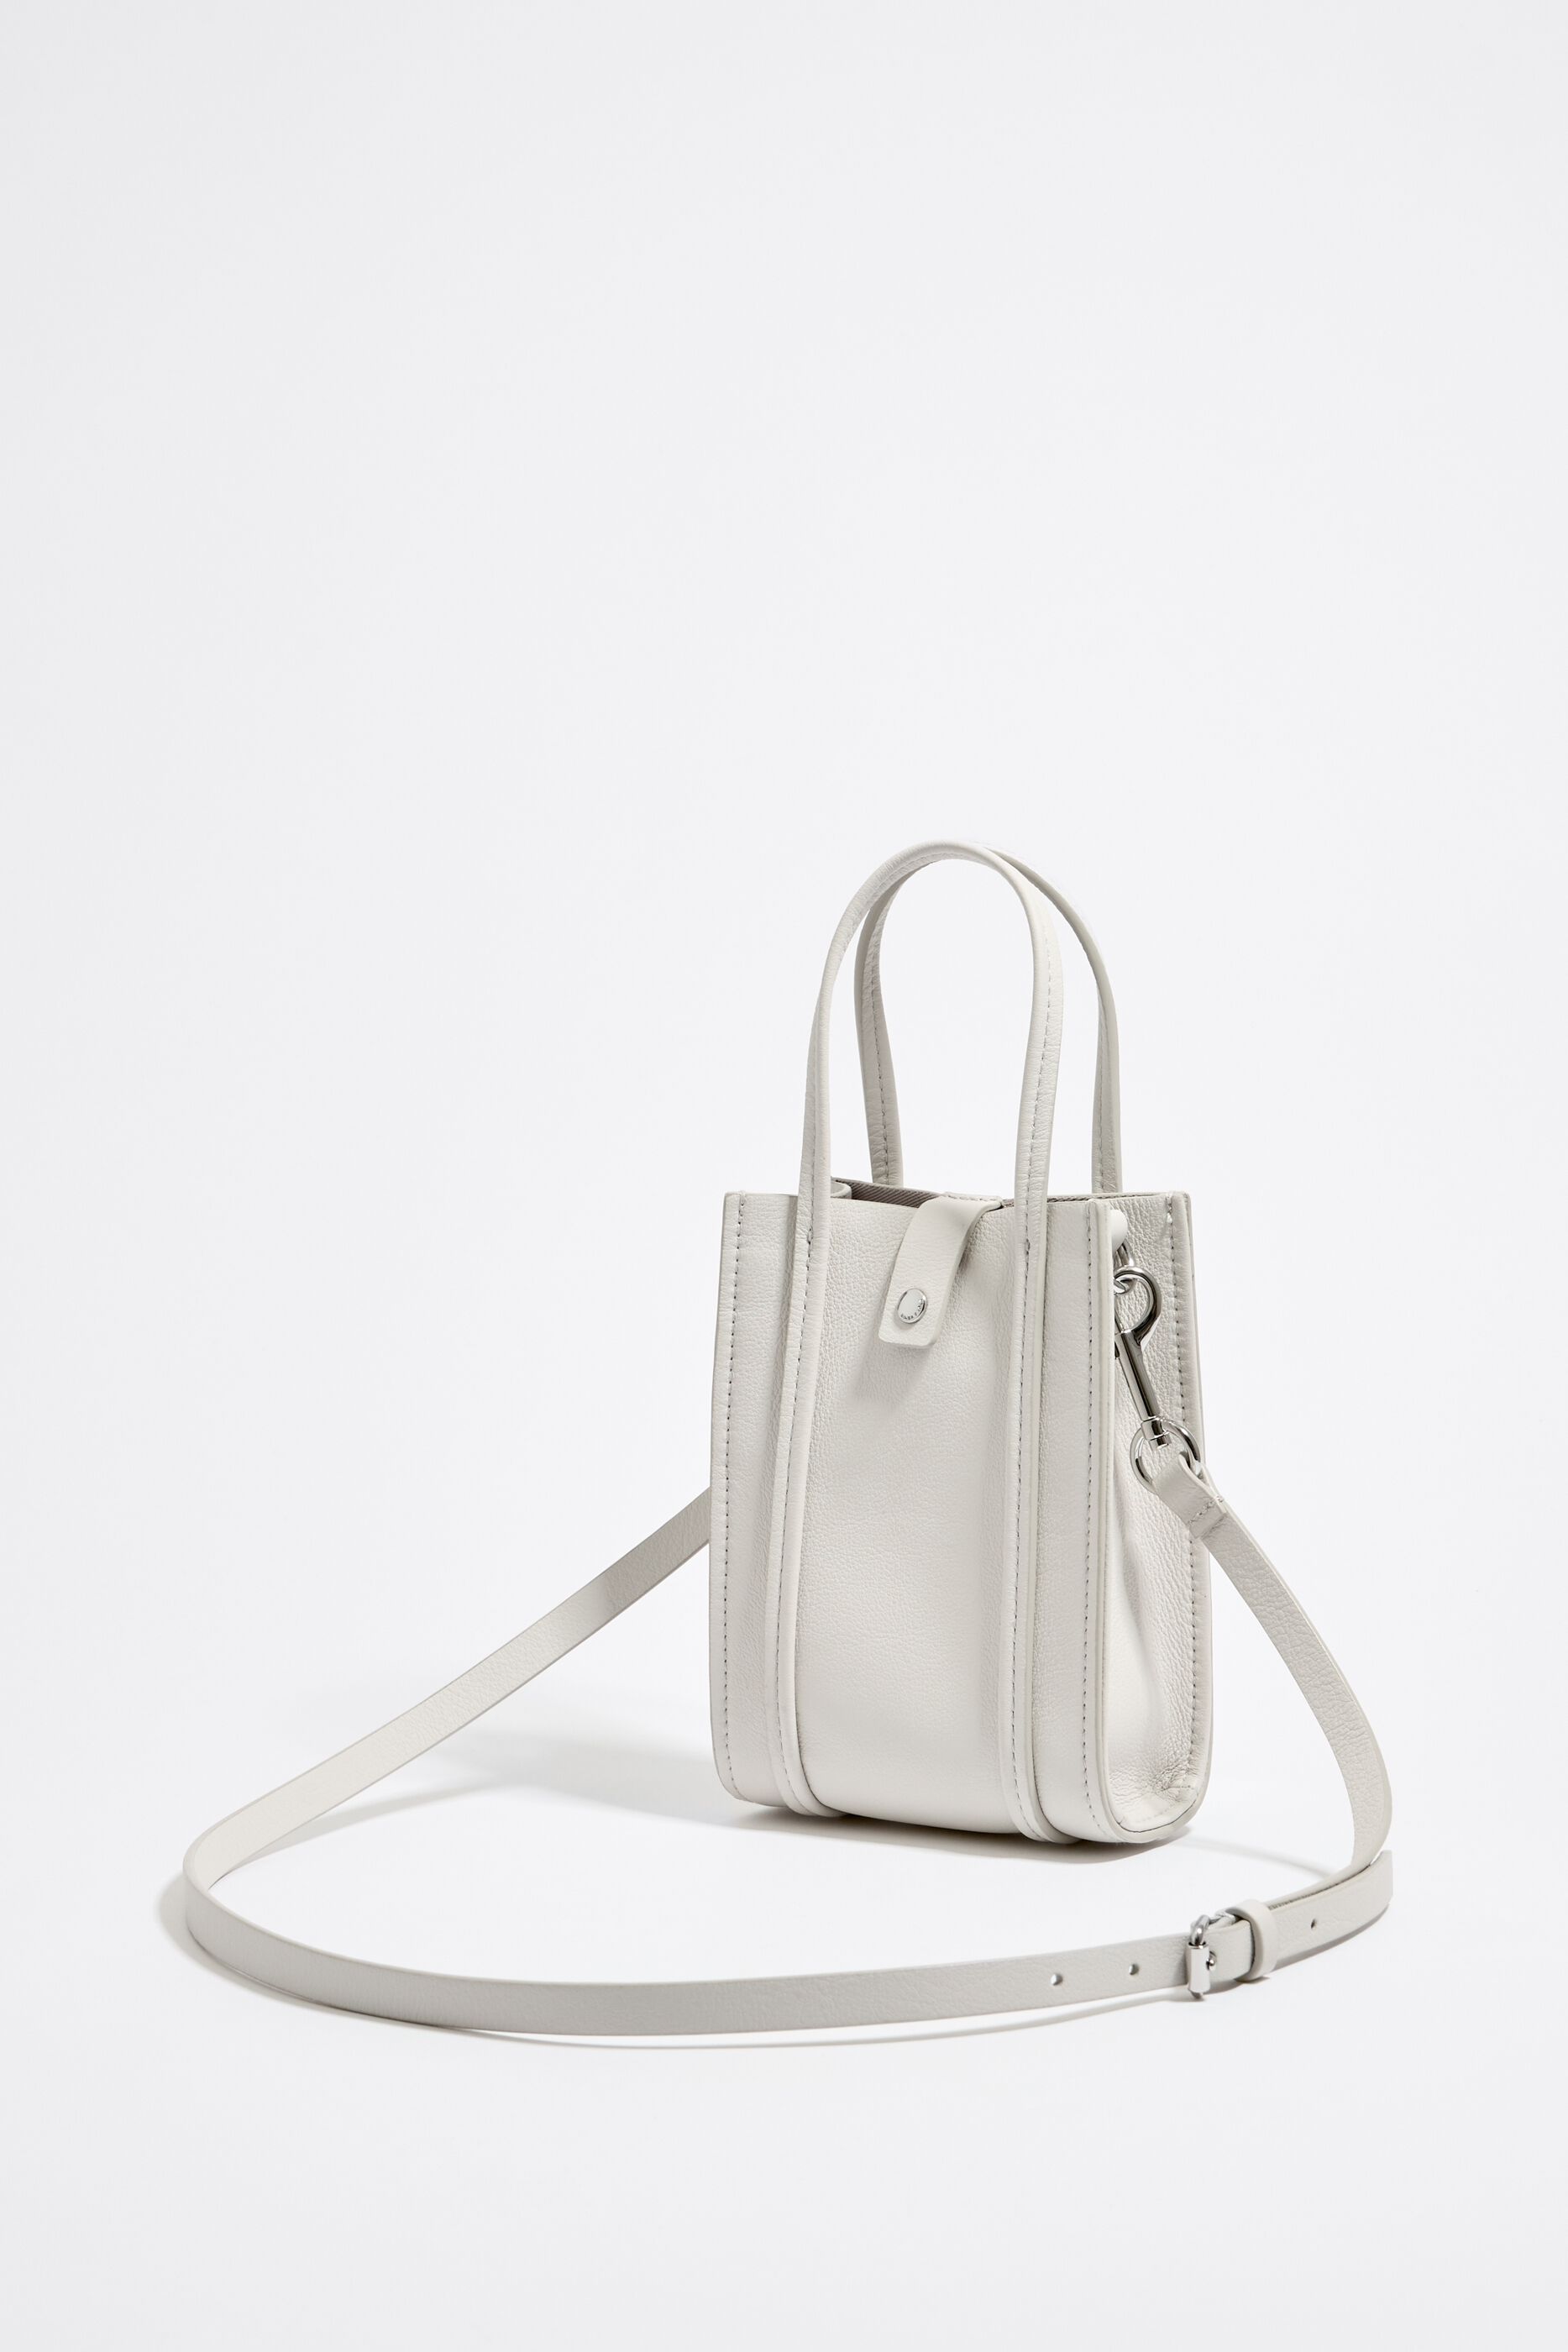 XS white off-leather crossbody bag